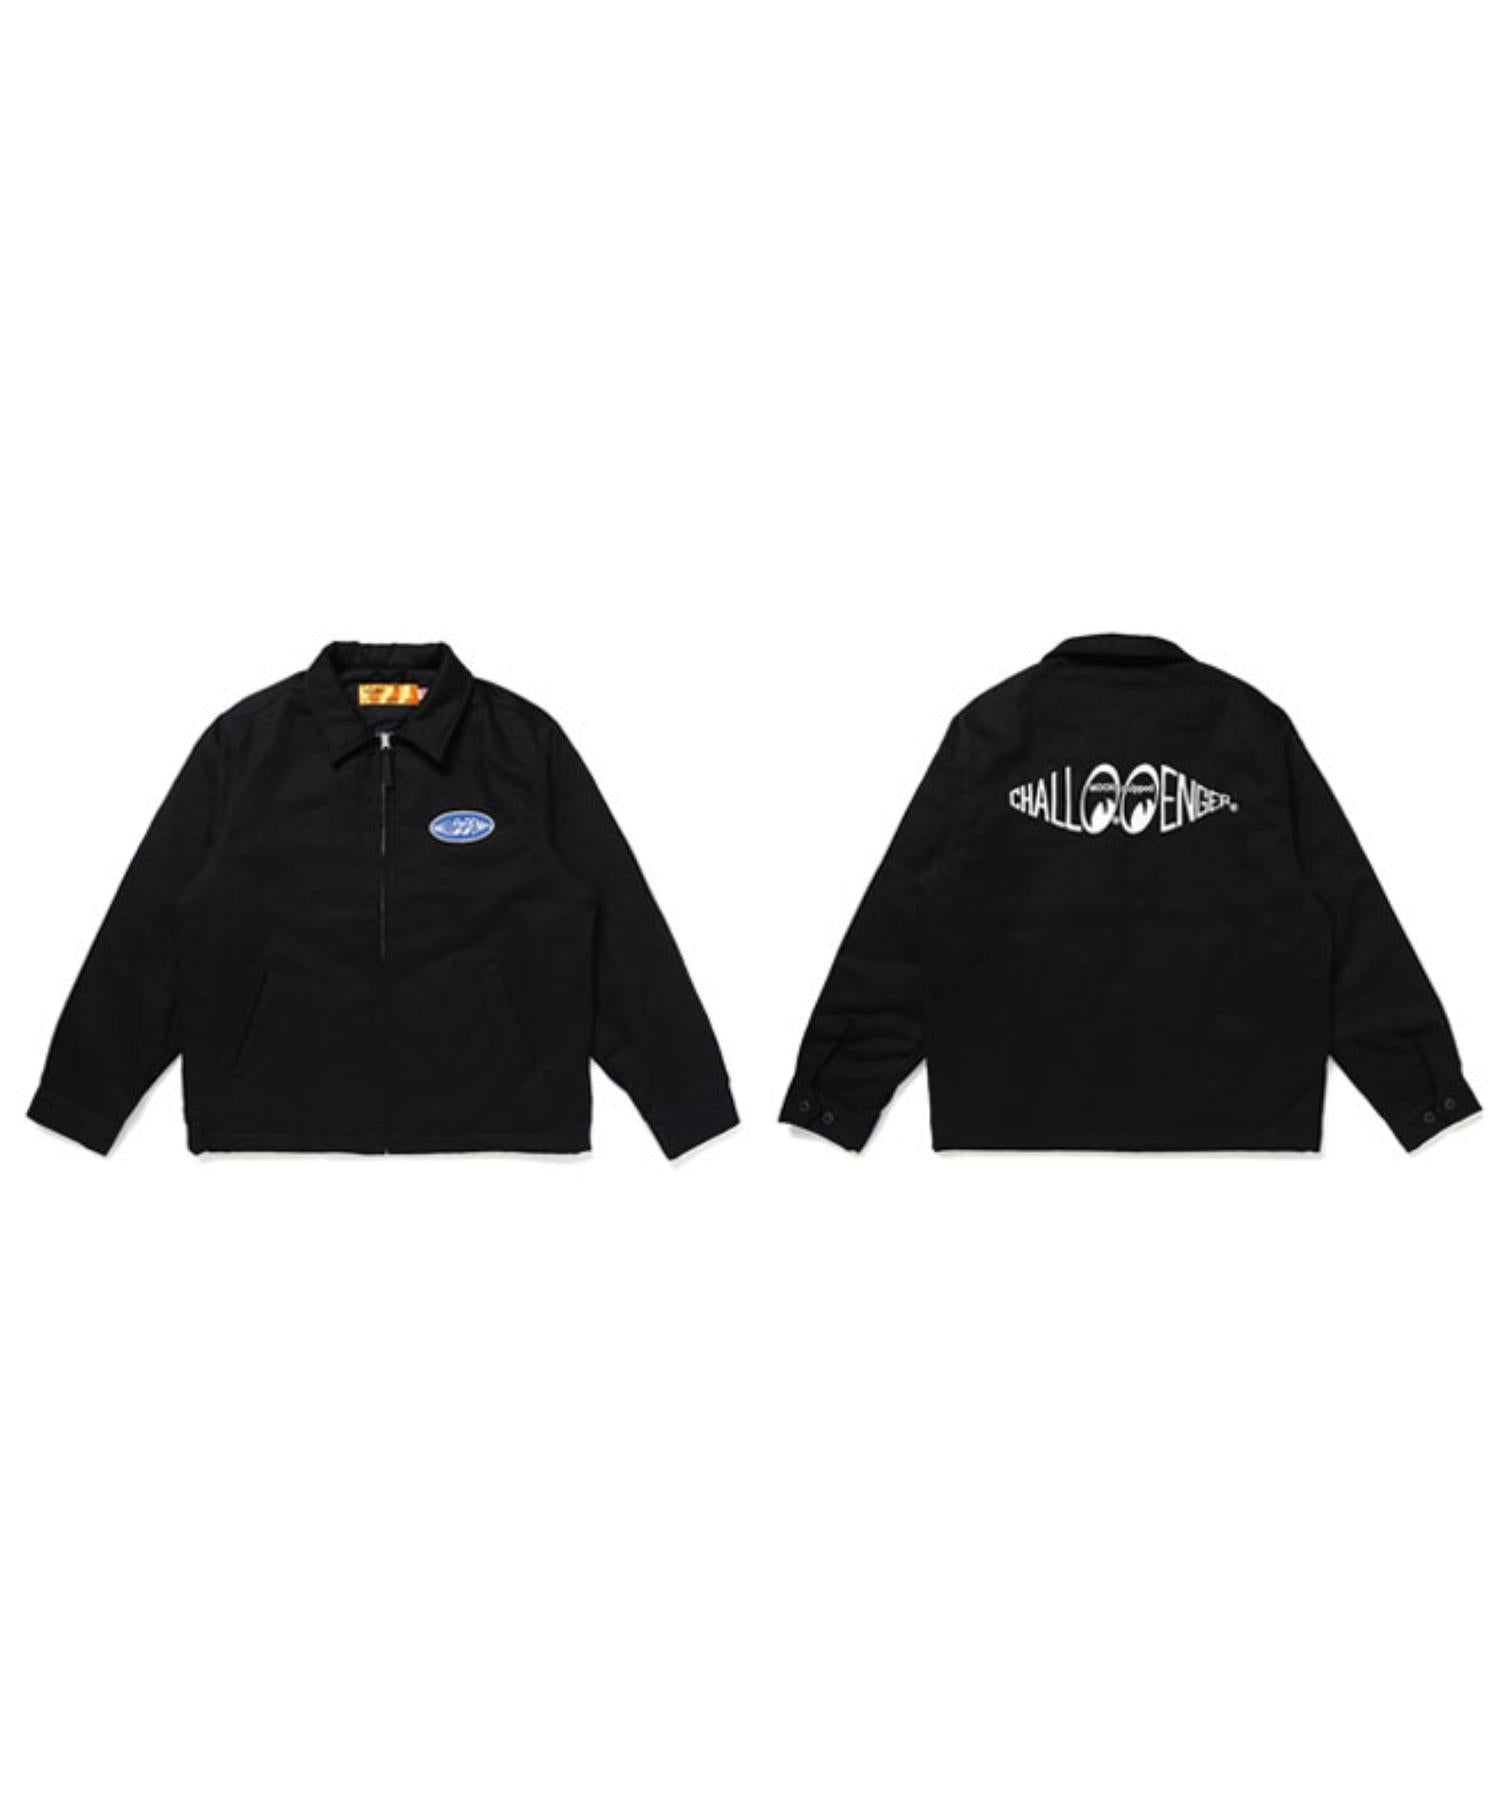 CHALLENGER MOON EQUIPPED WORK JACKET L最安値で出品致します